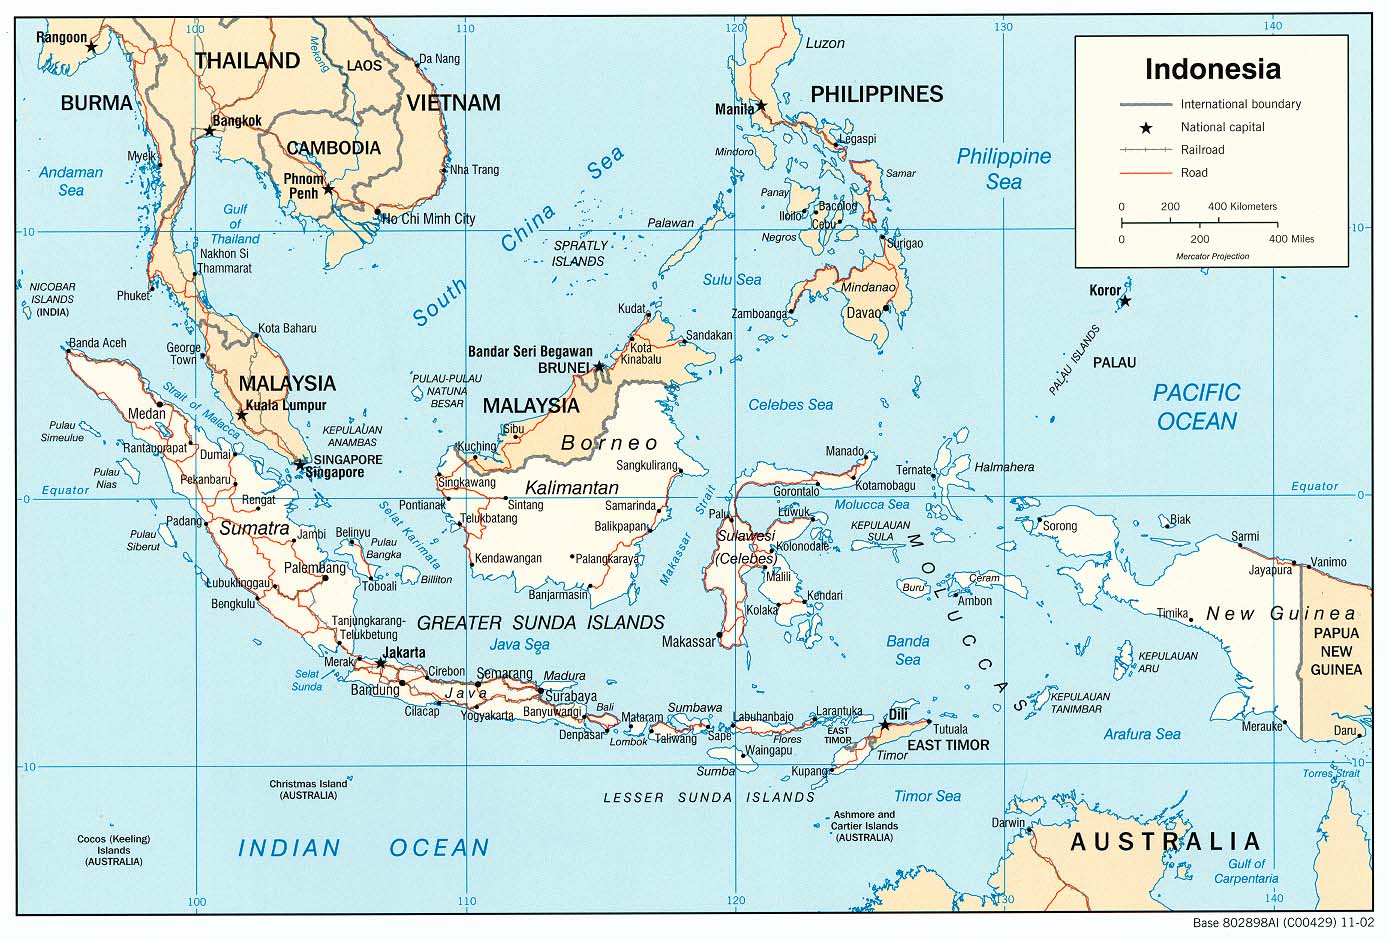 Indonesia Maps - Perry-Castañeda Map Collection - UT Library Online